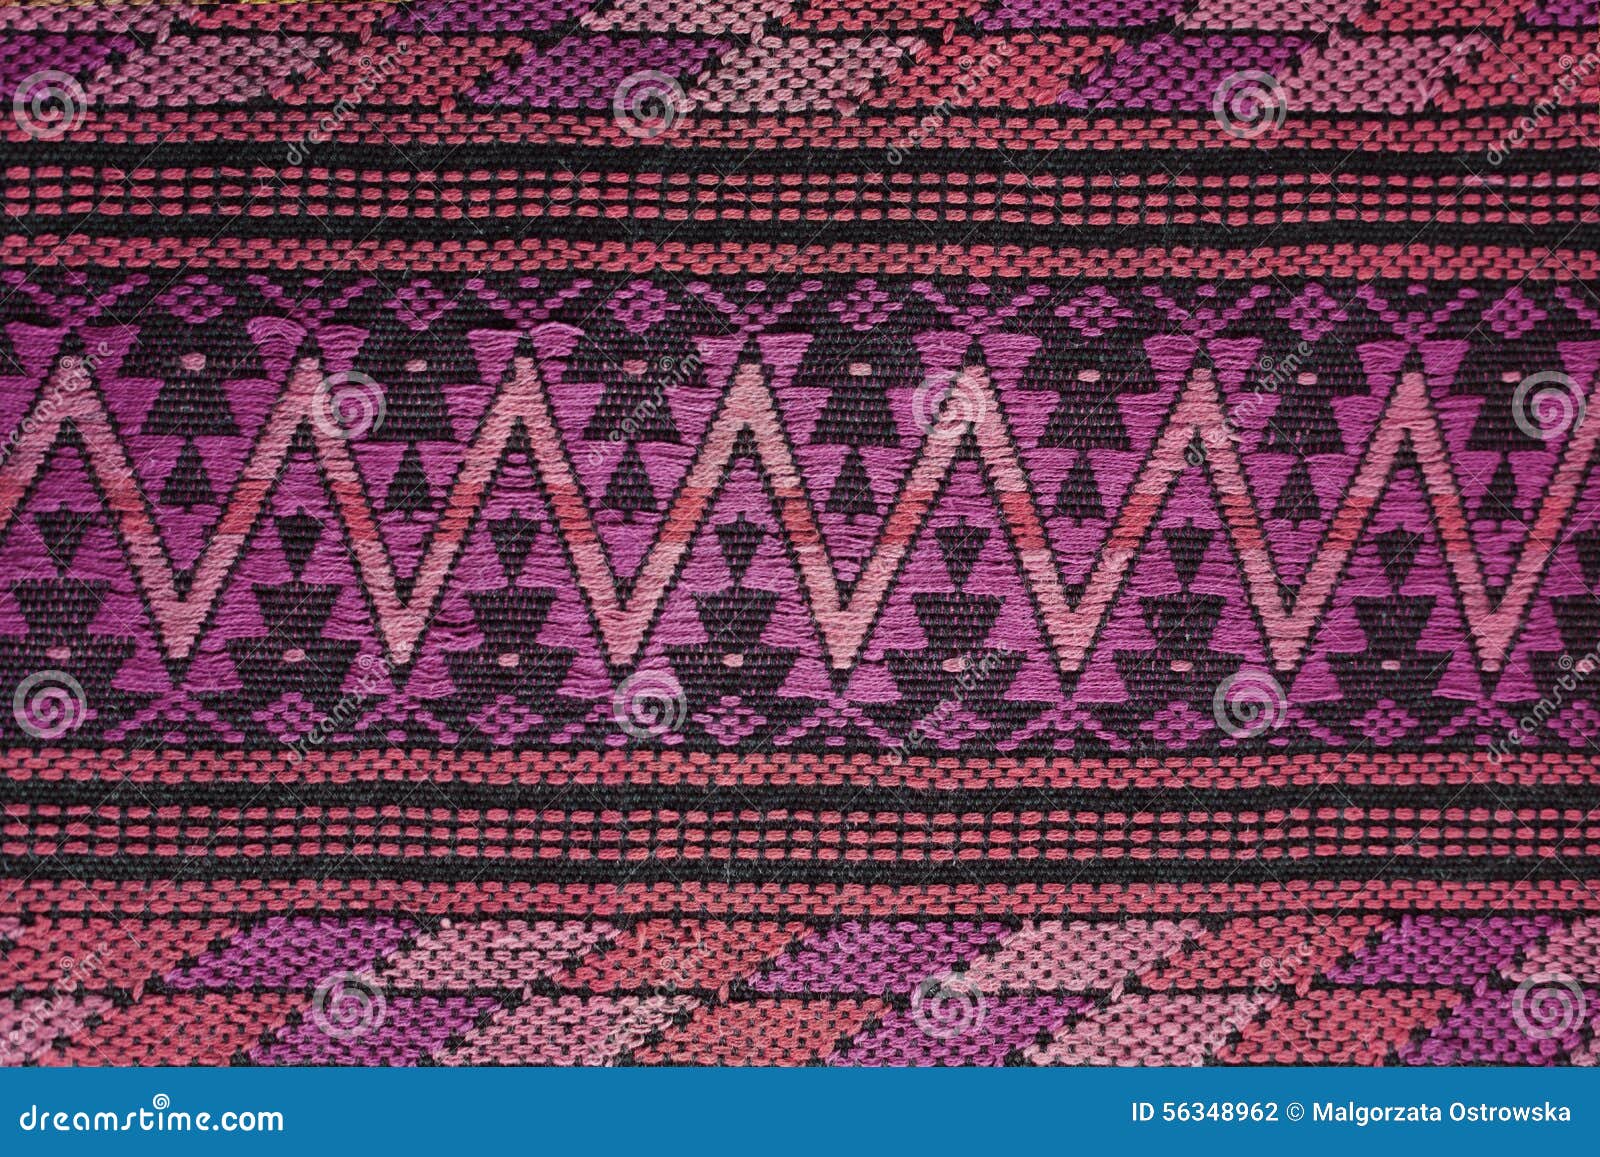 handmade woven textile from latin america